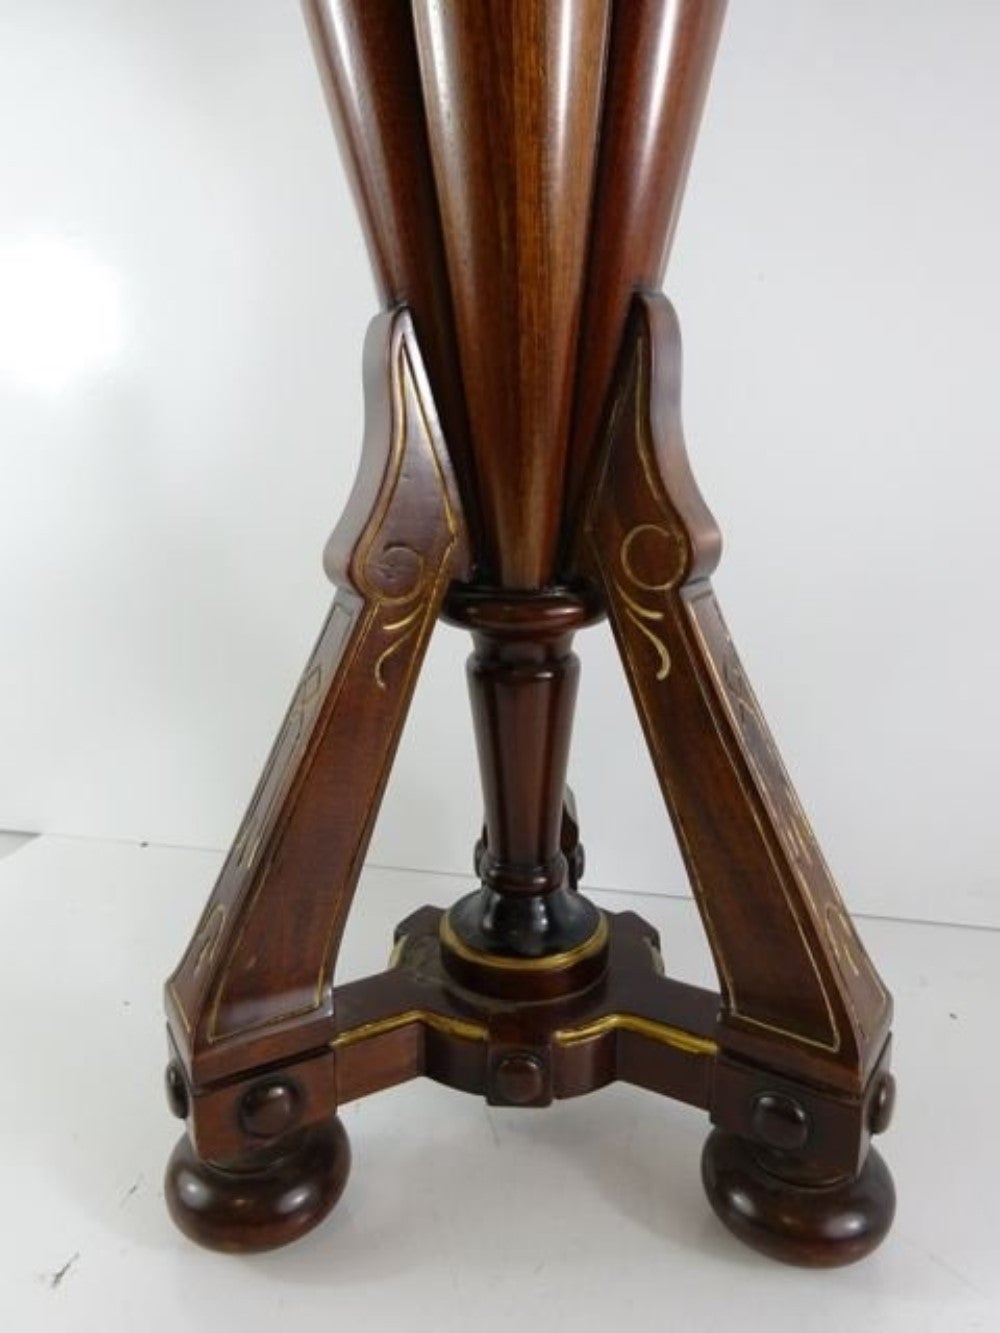 Umbrella stand in an Victorian style. Made with mahogany and brass with a bronze handle